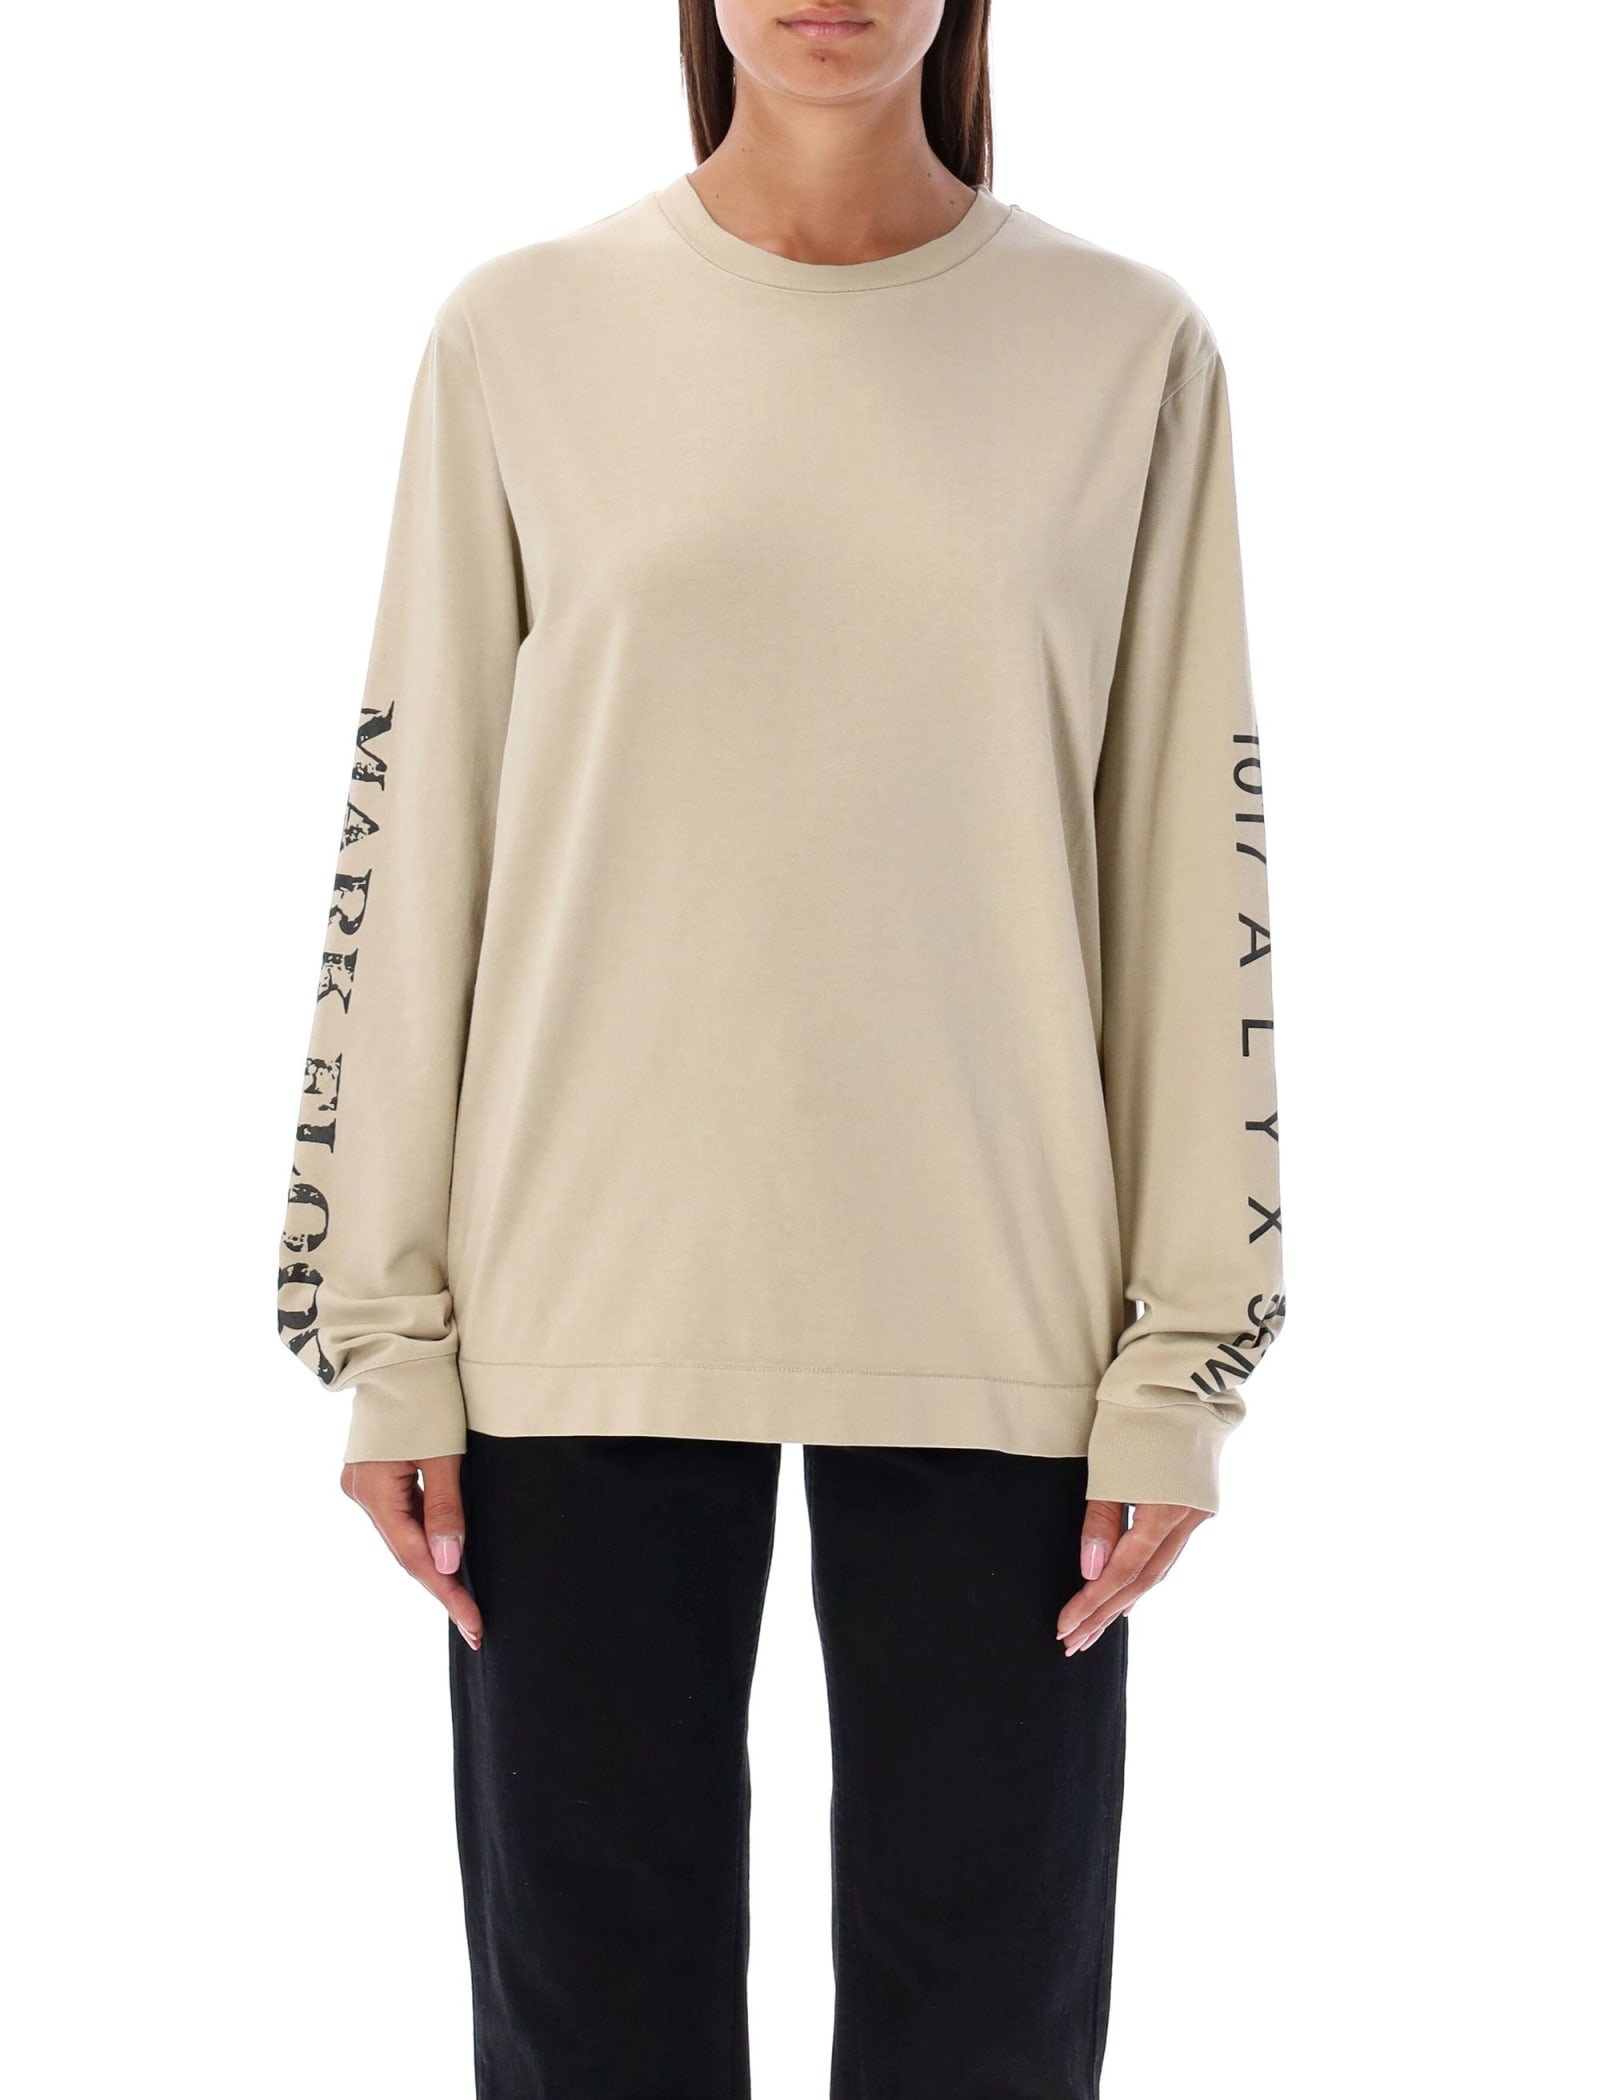 ALYX LONG-SLEEVED GRAPHIC T-SHIRT